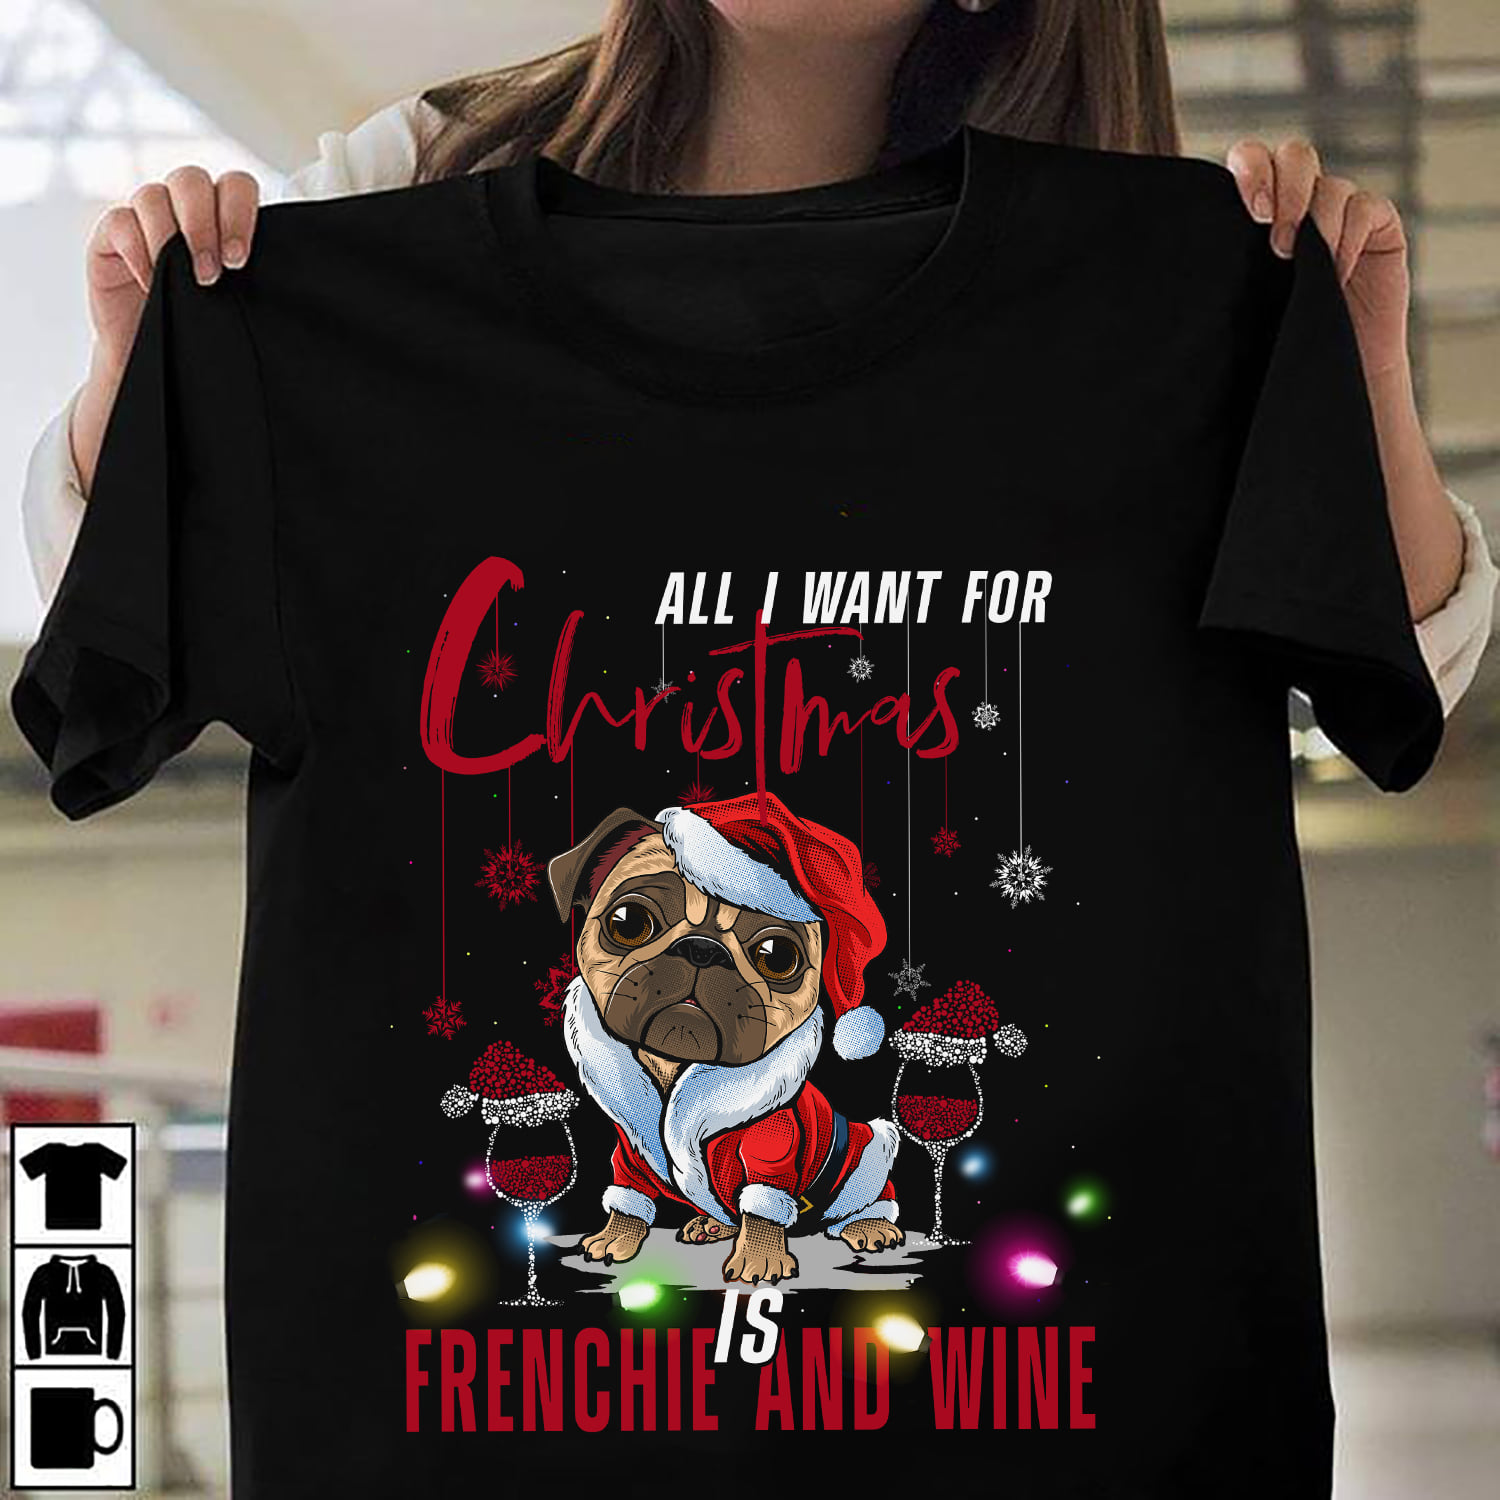 All I want for Christmas is Frenchie and wine - Wine for Christmas, Christmas day ugly sweater